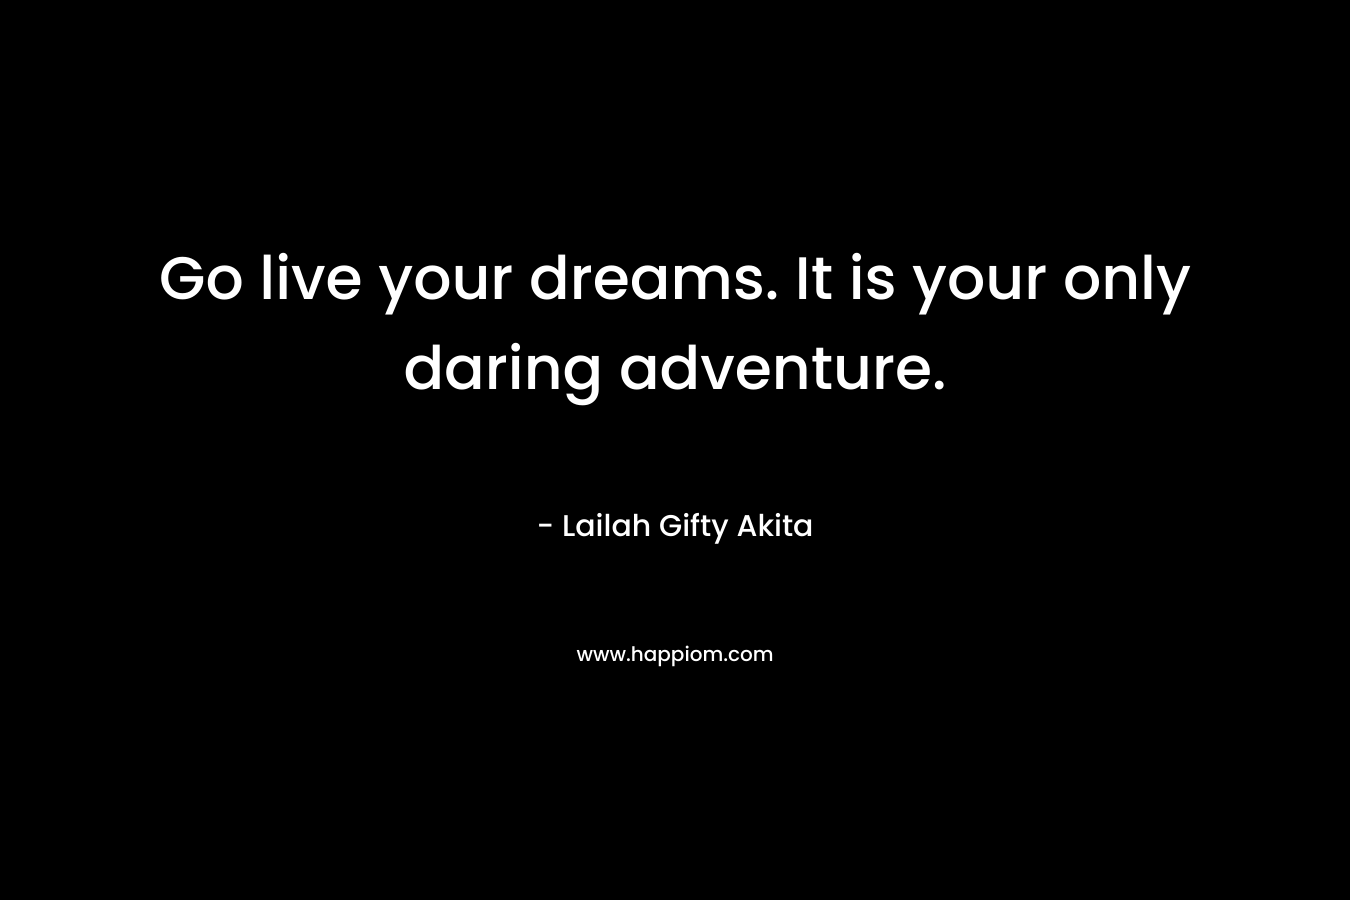 Go live your dreams. It is your only daring adventure.